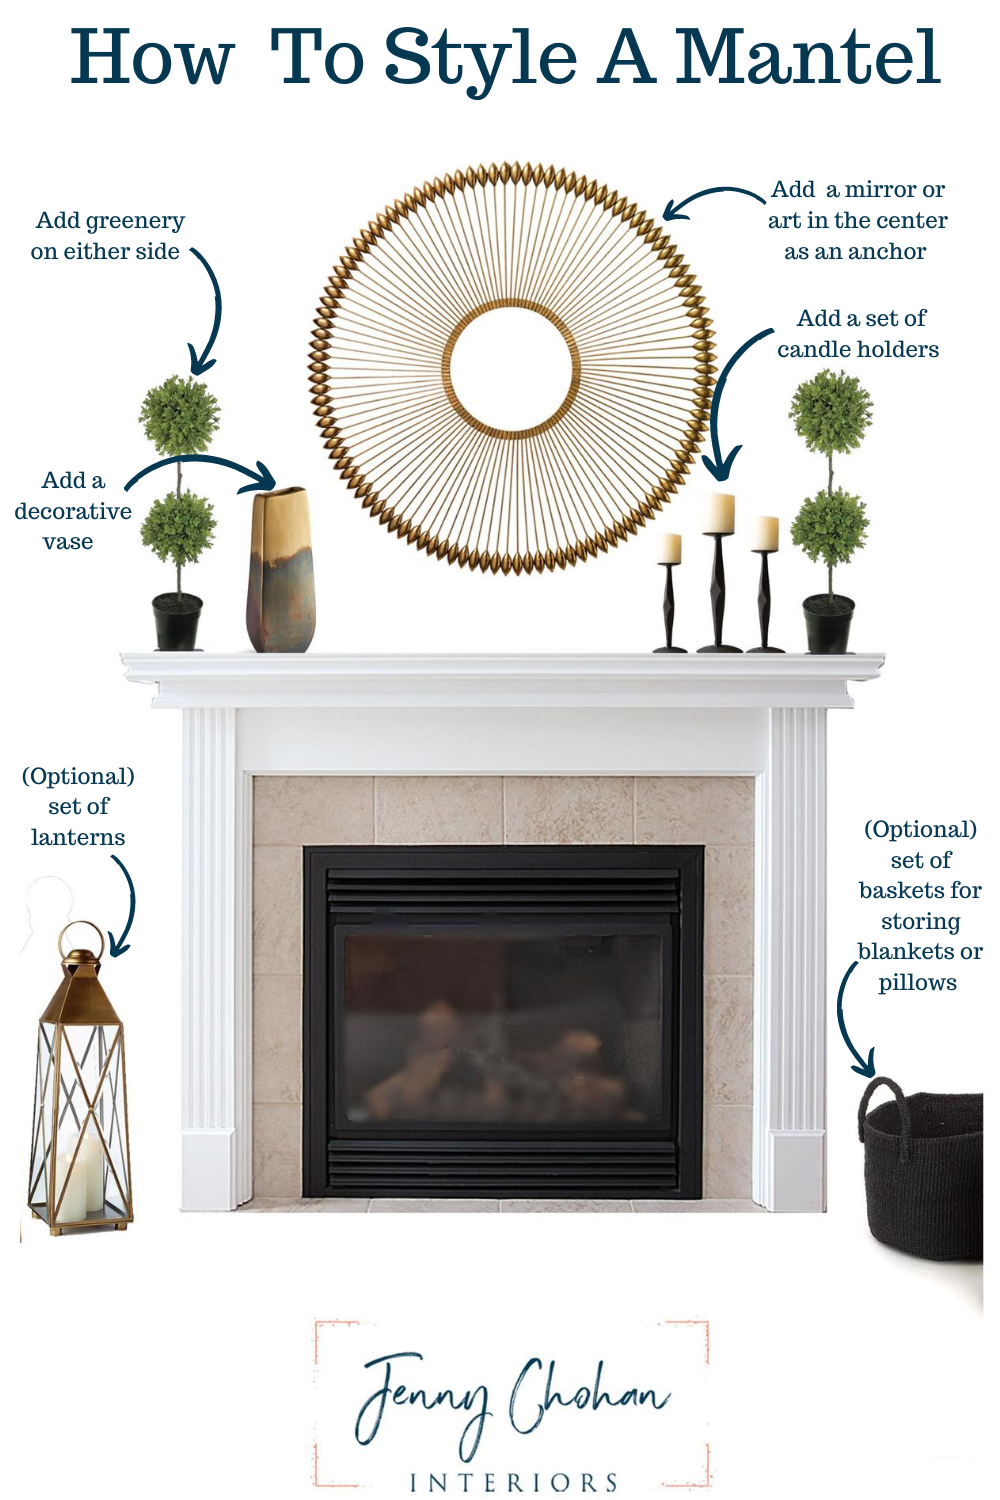 How To Style A Mantel — Jenny Chohan Interiors